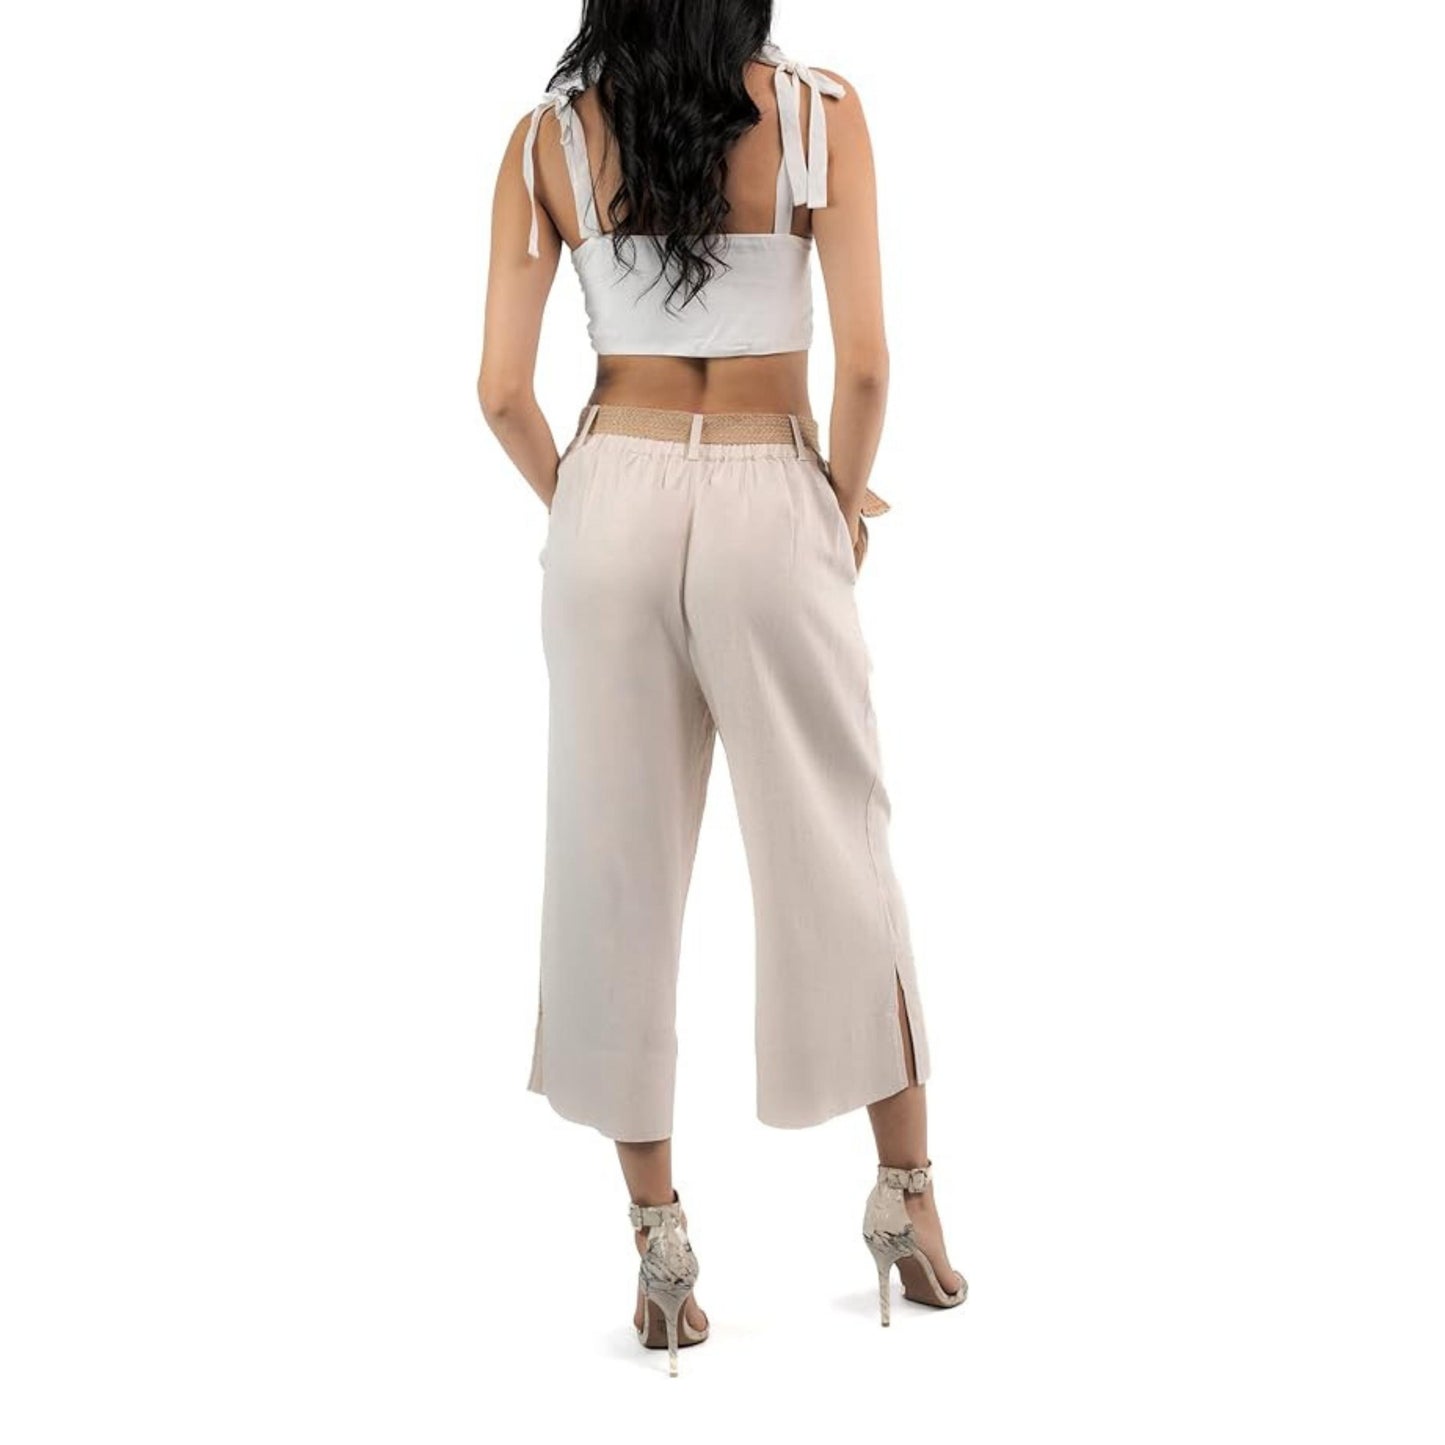 QUYUON Women's Capris Pants Casual Summer High Waisted Capris with Belt  Loops Ladies Capris with Pockets Loose Straight Leg Cropped Pants  Lightweight Capris Cozy Capris, Style P354 Beige L 